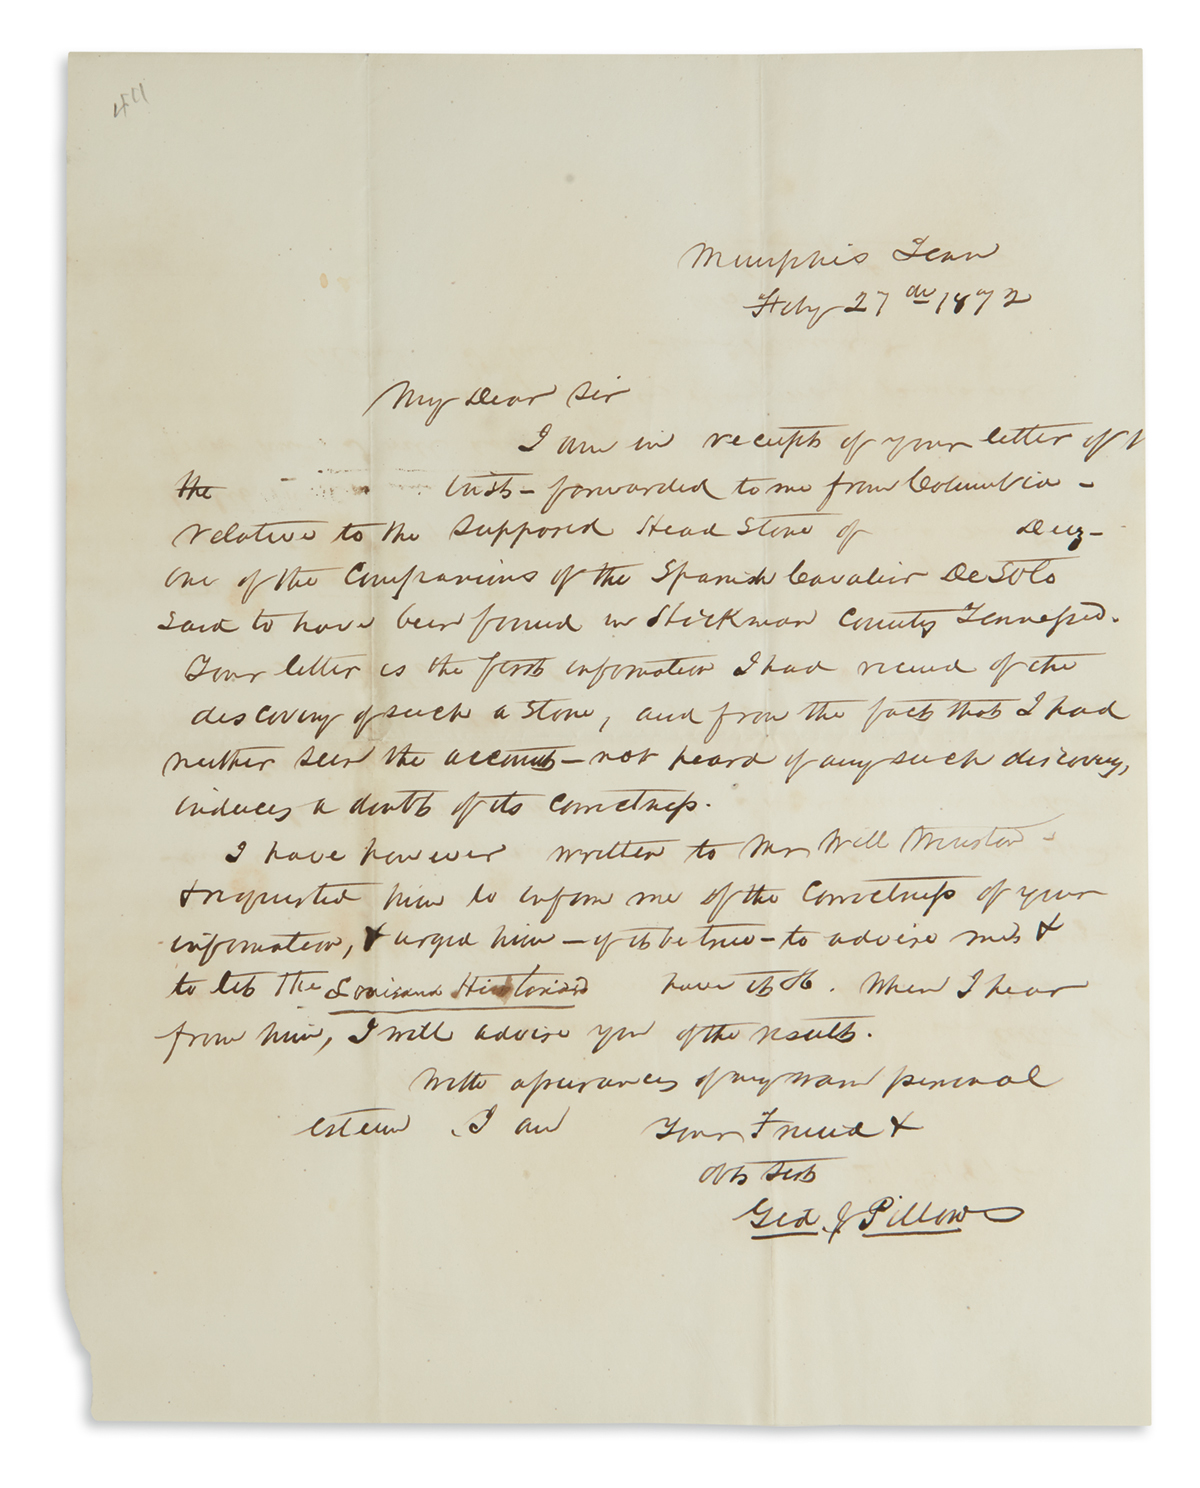 GIDEON JOHNSON PILLOW. Autograph Letter Signed, Gid. J. Pillow, to Edward G.W. Butler, acknowledging receipt o...